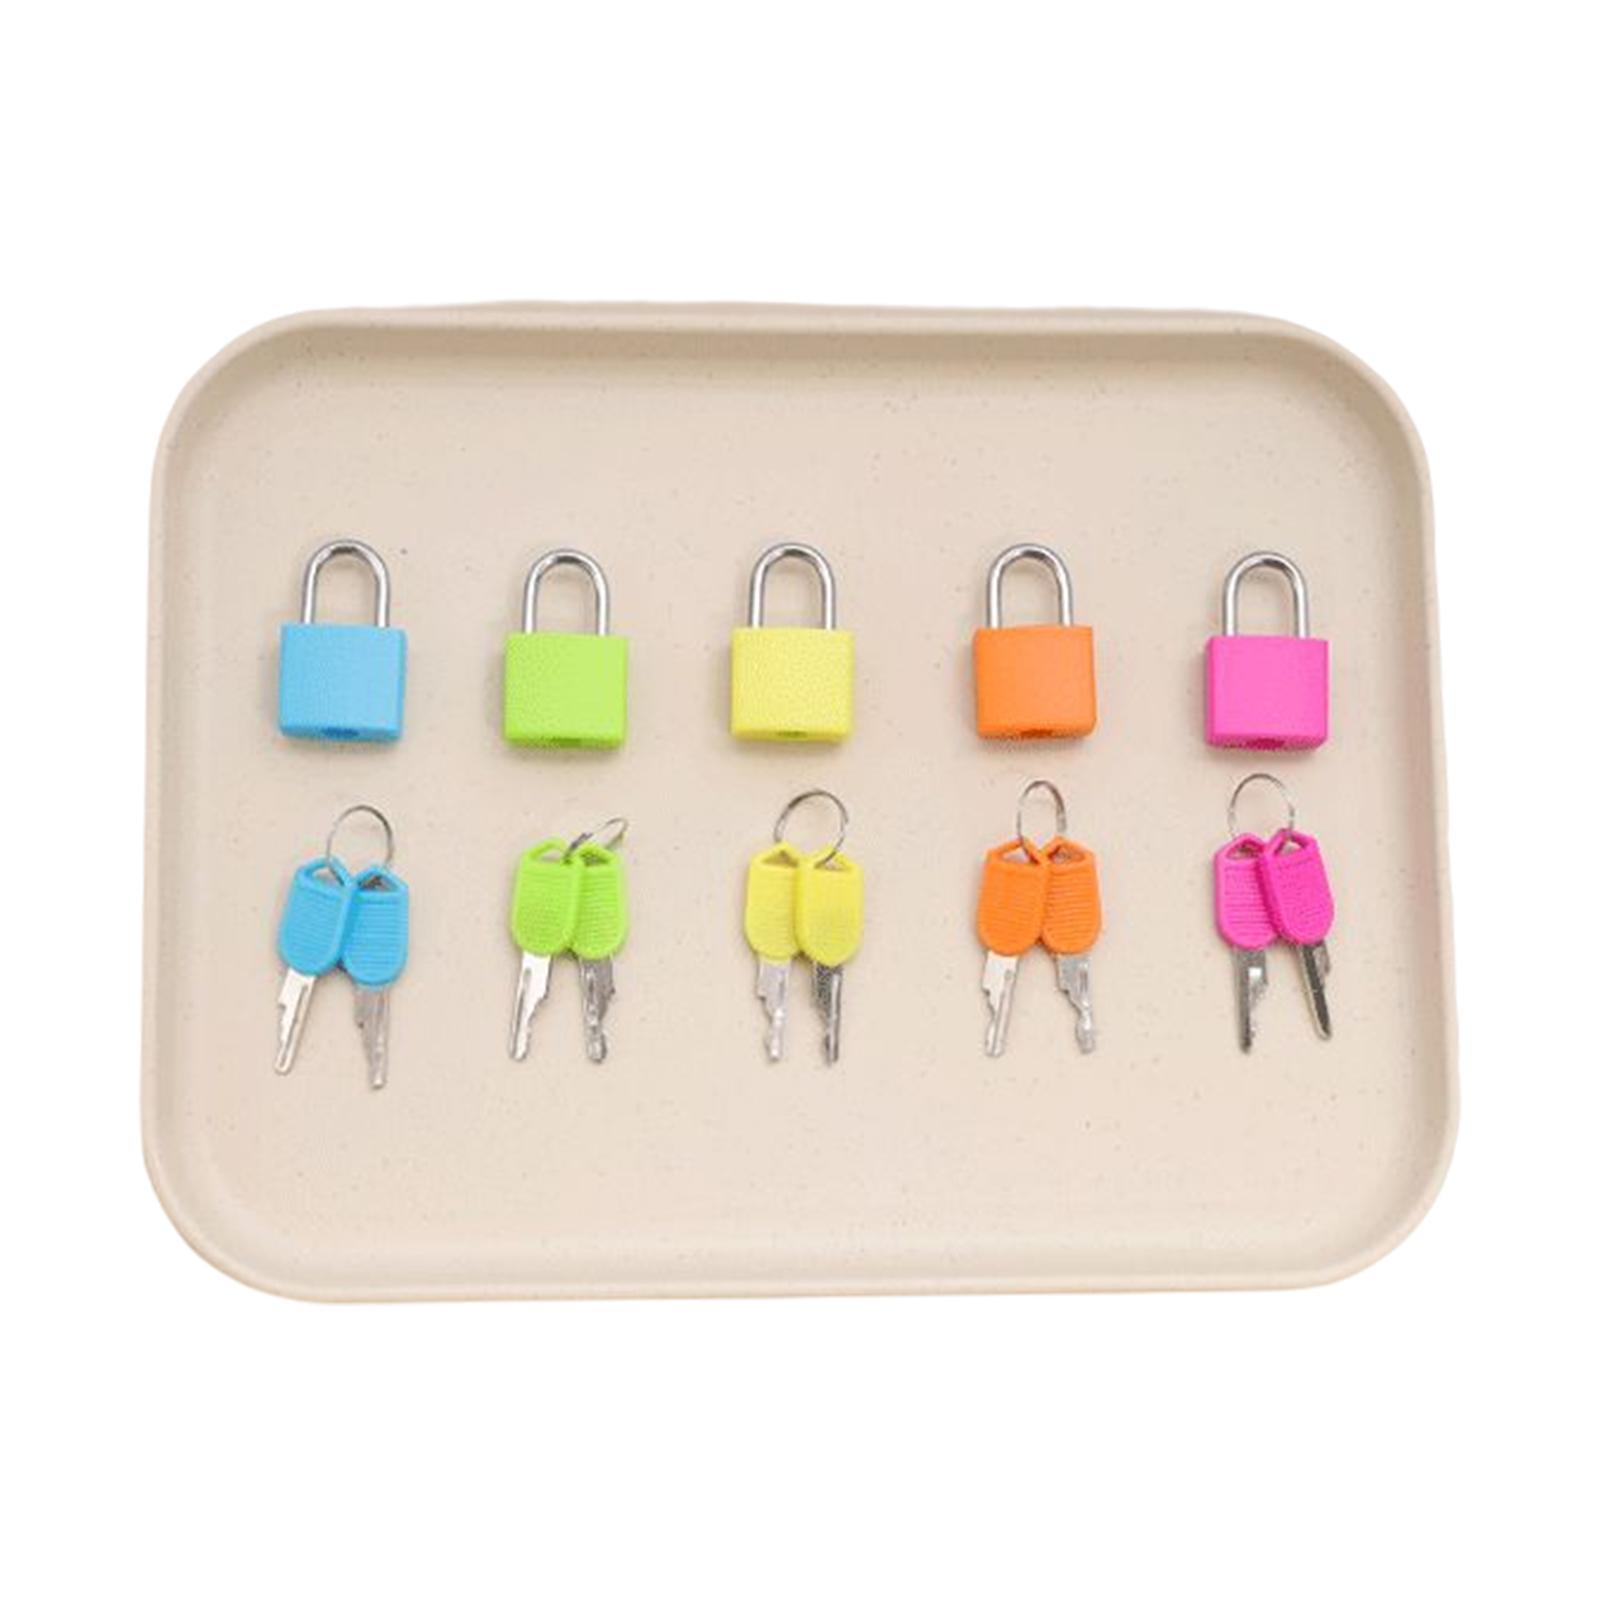 5 Pieces Montessori Material Color Matching Lock Set for Children Toddlers